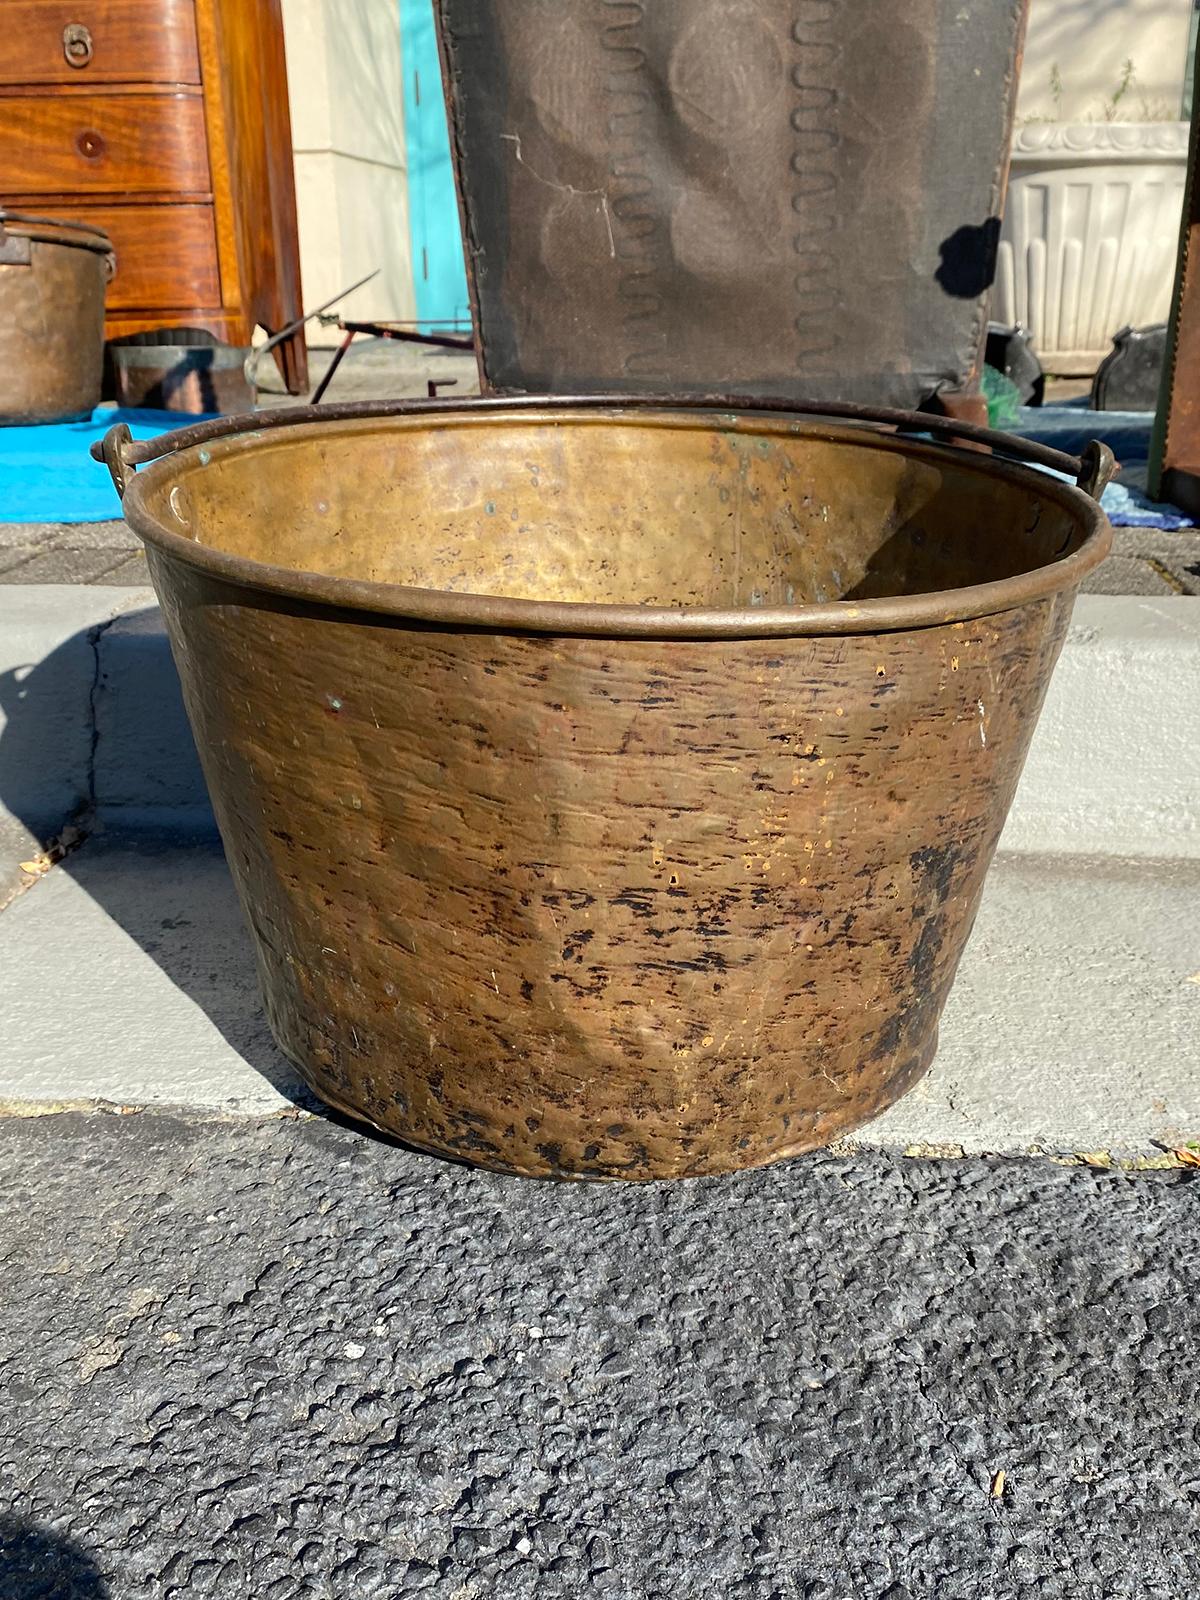 Large Circa 1840 American copper jelly pail with wrought iron handle.